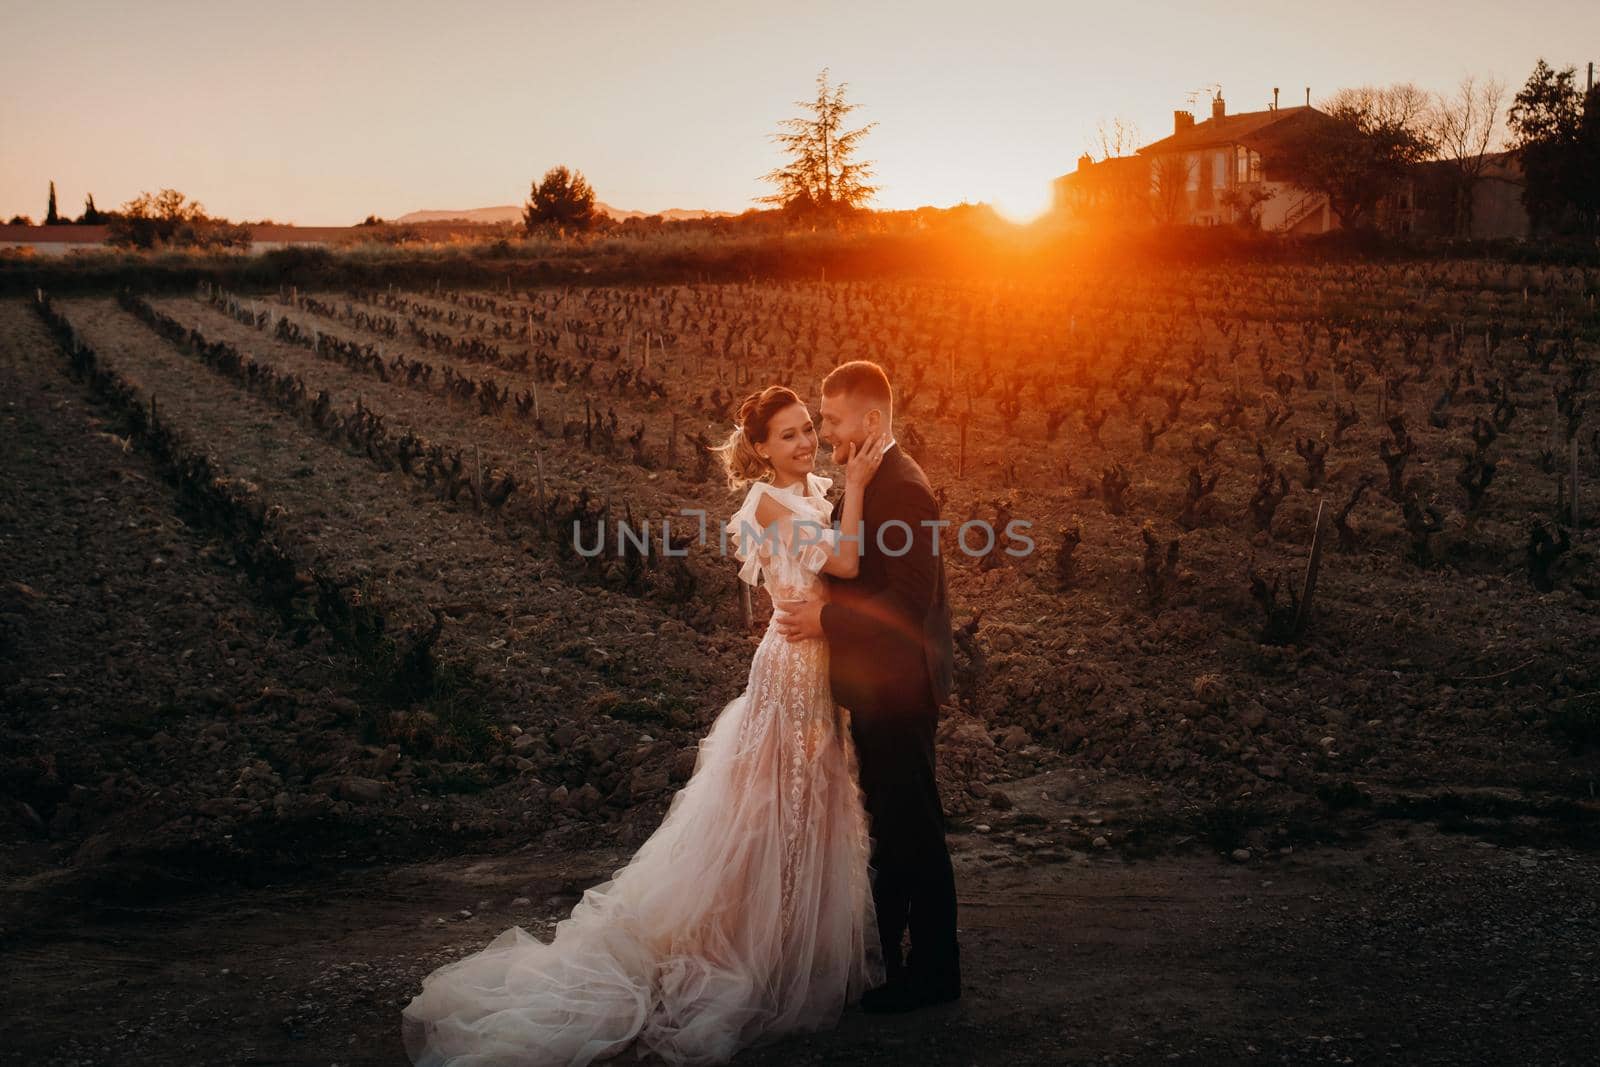 Wedding couple at sunset in France.Wedding in Provence.Wedding photo shoot in France by Lobachad